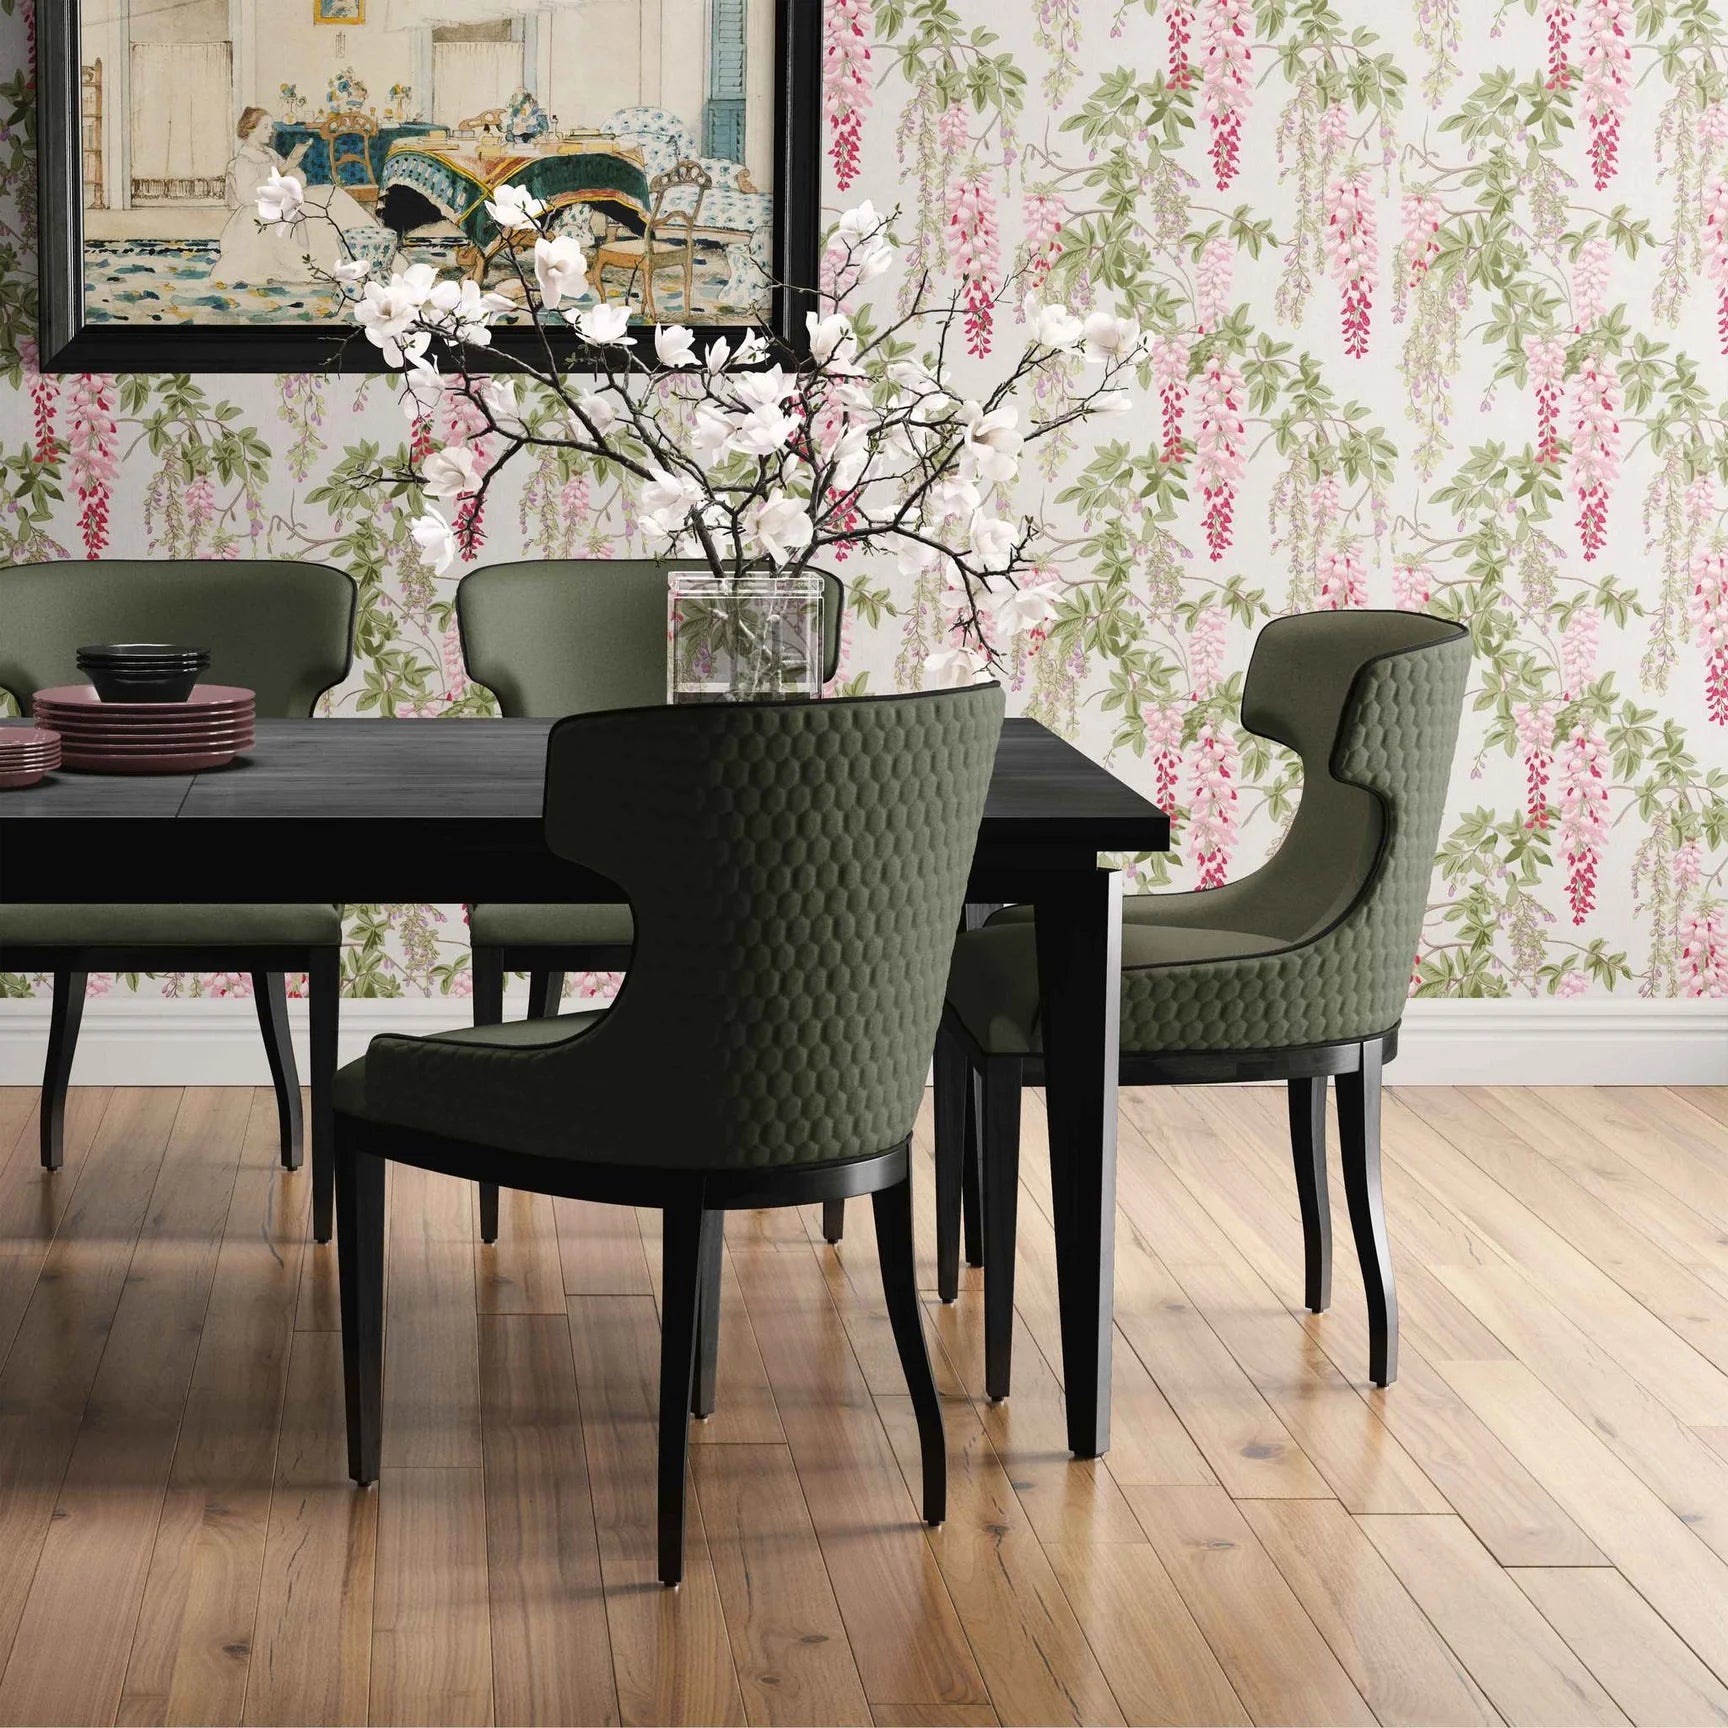 Modern dining room with soft floral wallpaper